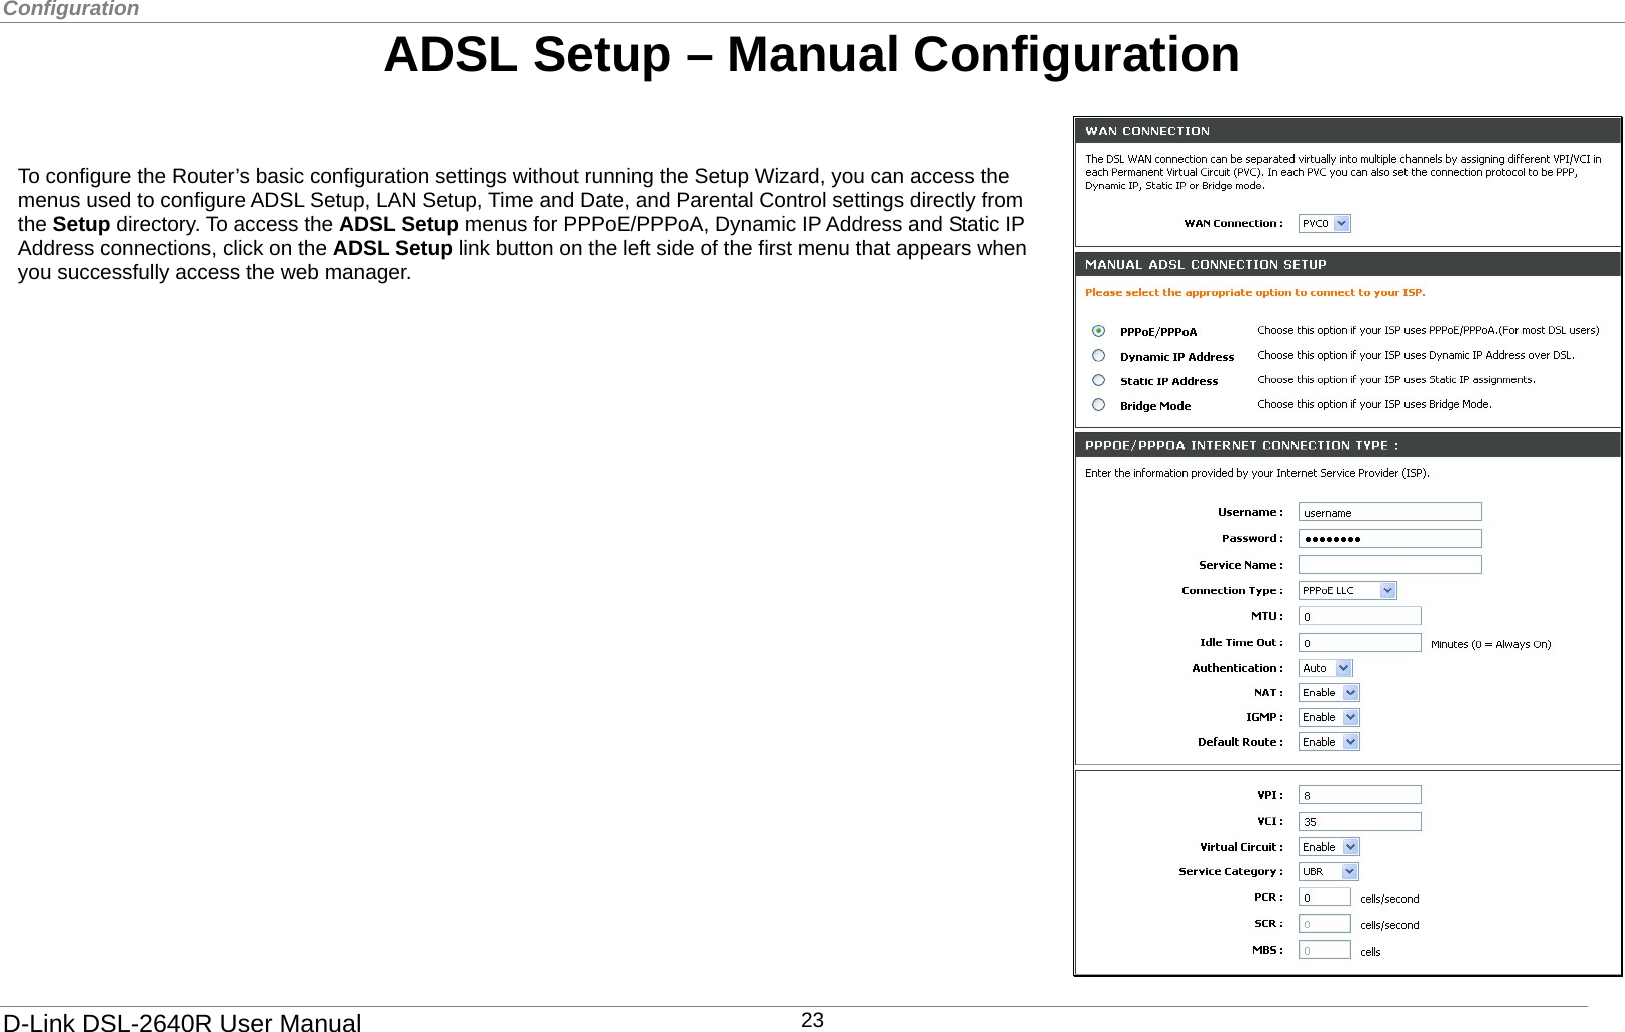 Configuration   ADSL Setup – Manual Configuration   To configure the Router’s basic configuration settings without running the Setup Wizard, you can access the menus used to configure ADSL Setup, LAN Setup, Time and Date, and Parental Control settings directly from the Setup directory. To access the ADSL Setup menus for PPPoE/PPPoA, Dynamic IP Address and Static IP Address connections, click on the ADSL Setup link button on the left side of the first menu that appears when you successfully access the web manager. D-Link DSL-2640R User Manual 23